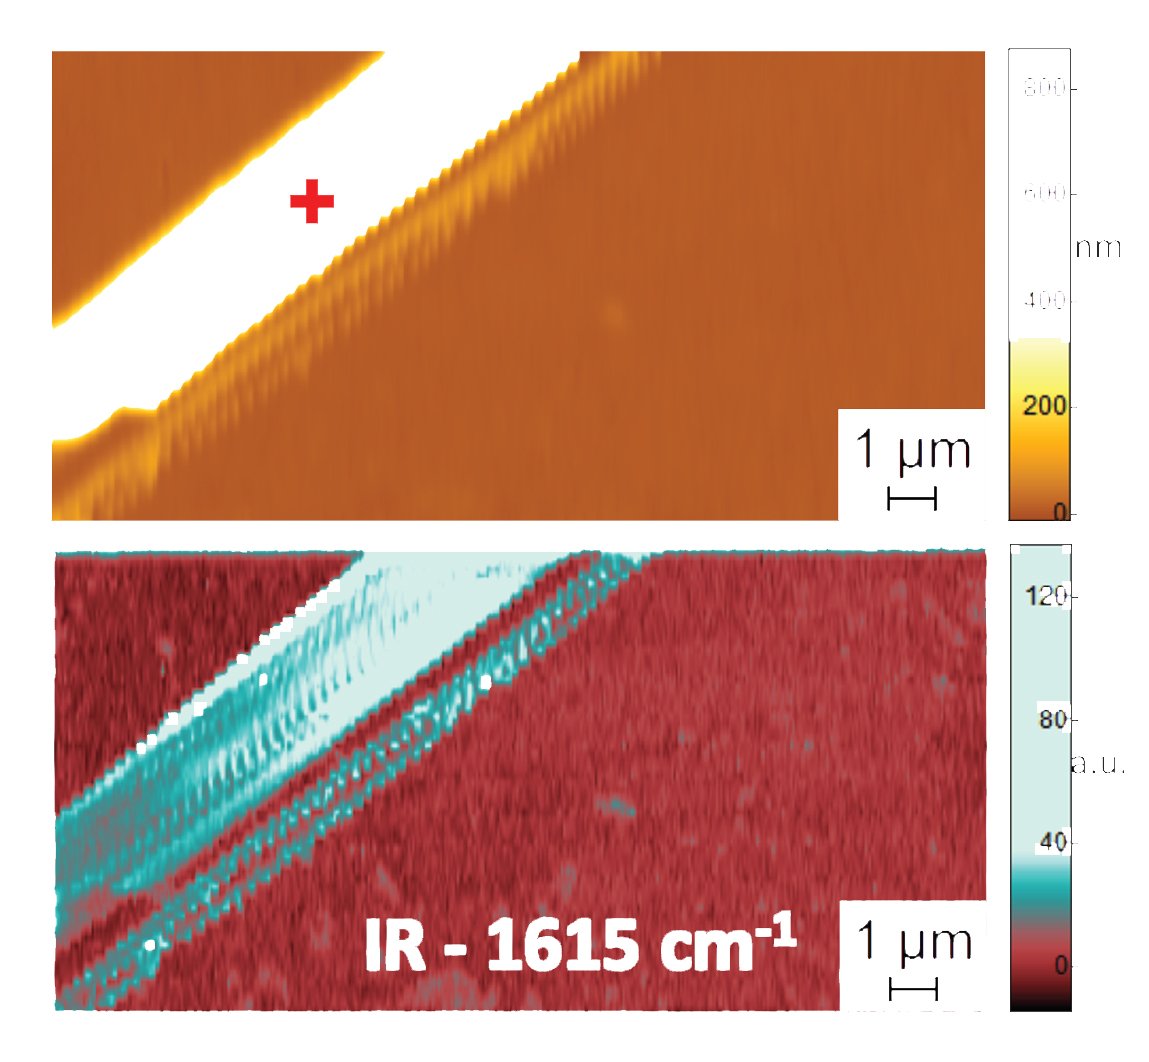 Atomic force microscope image showing topography (top) and PTIR absorption image indicating composition and conformation (bottom) of a diphenylalanine peptide fibril in water. Additional data, recording the spectrum of infrared radiation absorbed by the peptide fibrils, provides information on their folding pattern. The PTIR spectrum indicated, for example, that diphenylalanine assumes a pure anti-parallel β-sheet conformation.  Credit: NIST